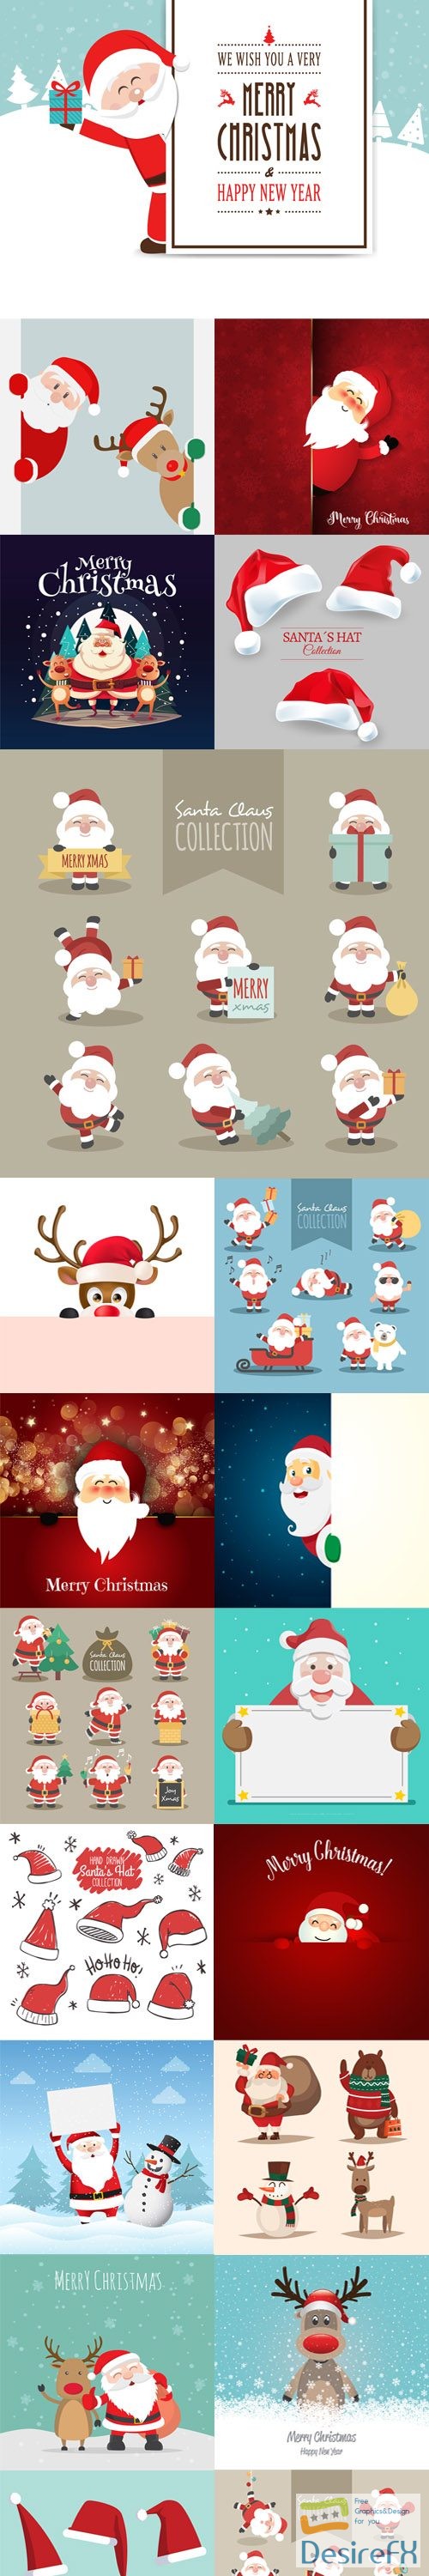 Lovely Christmas Characters Collection in Vector